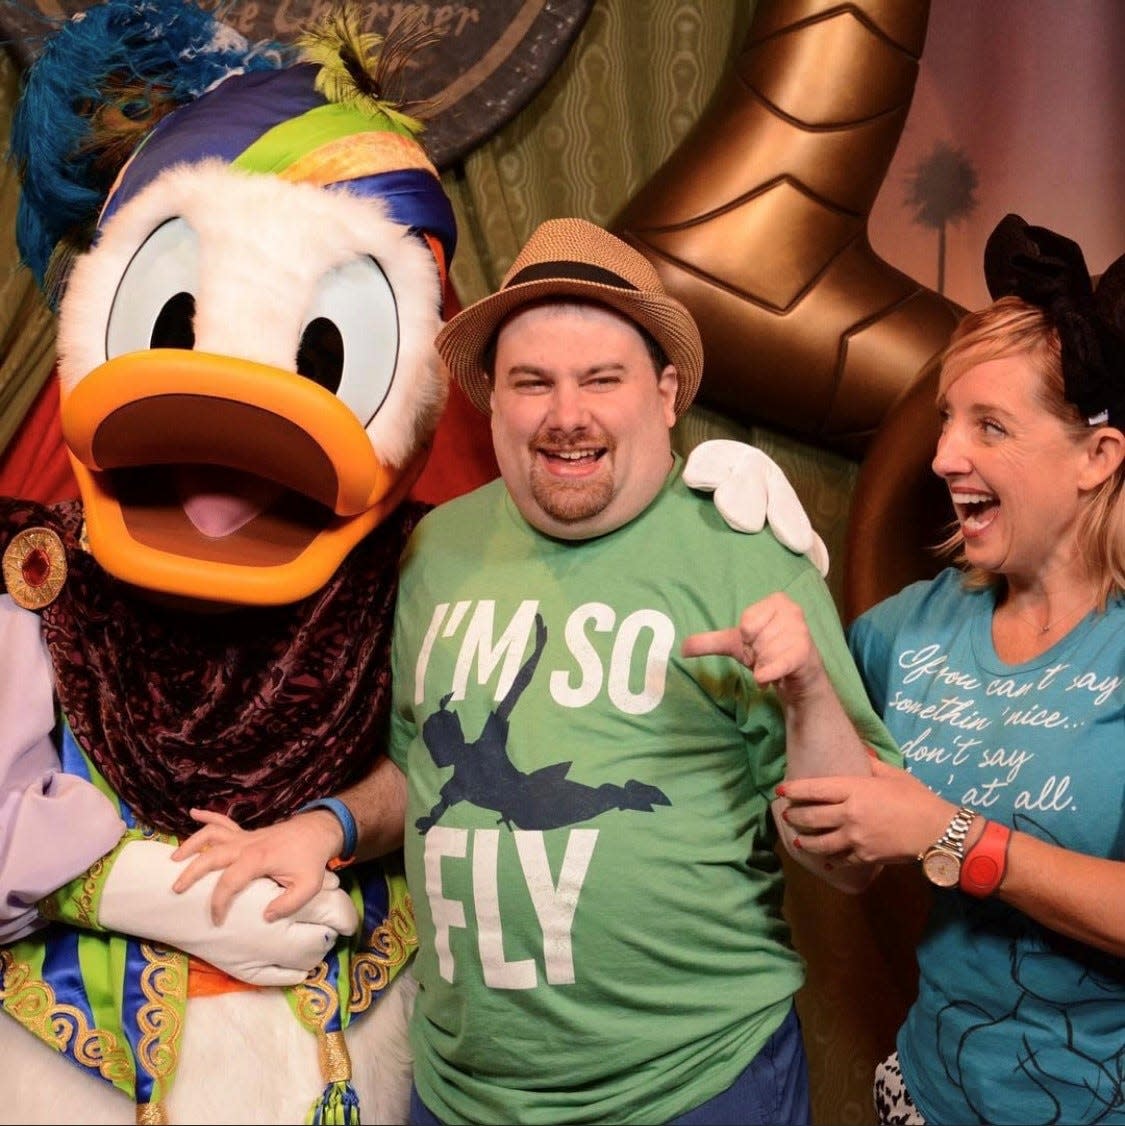 Tami Hill, right, looks on with a smile as her younger brother, Patrick, who has severe and profound disabilities, meets Donald Duck at Walt Disney World.